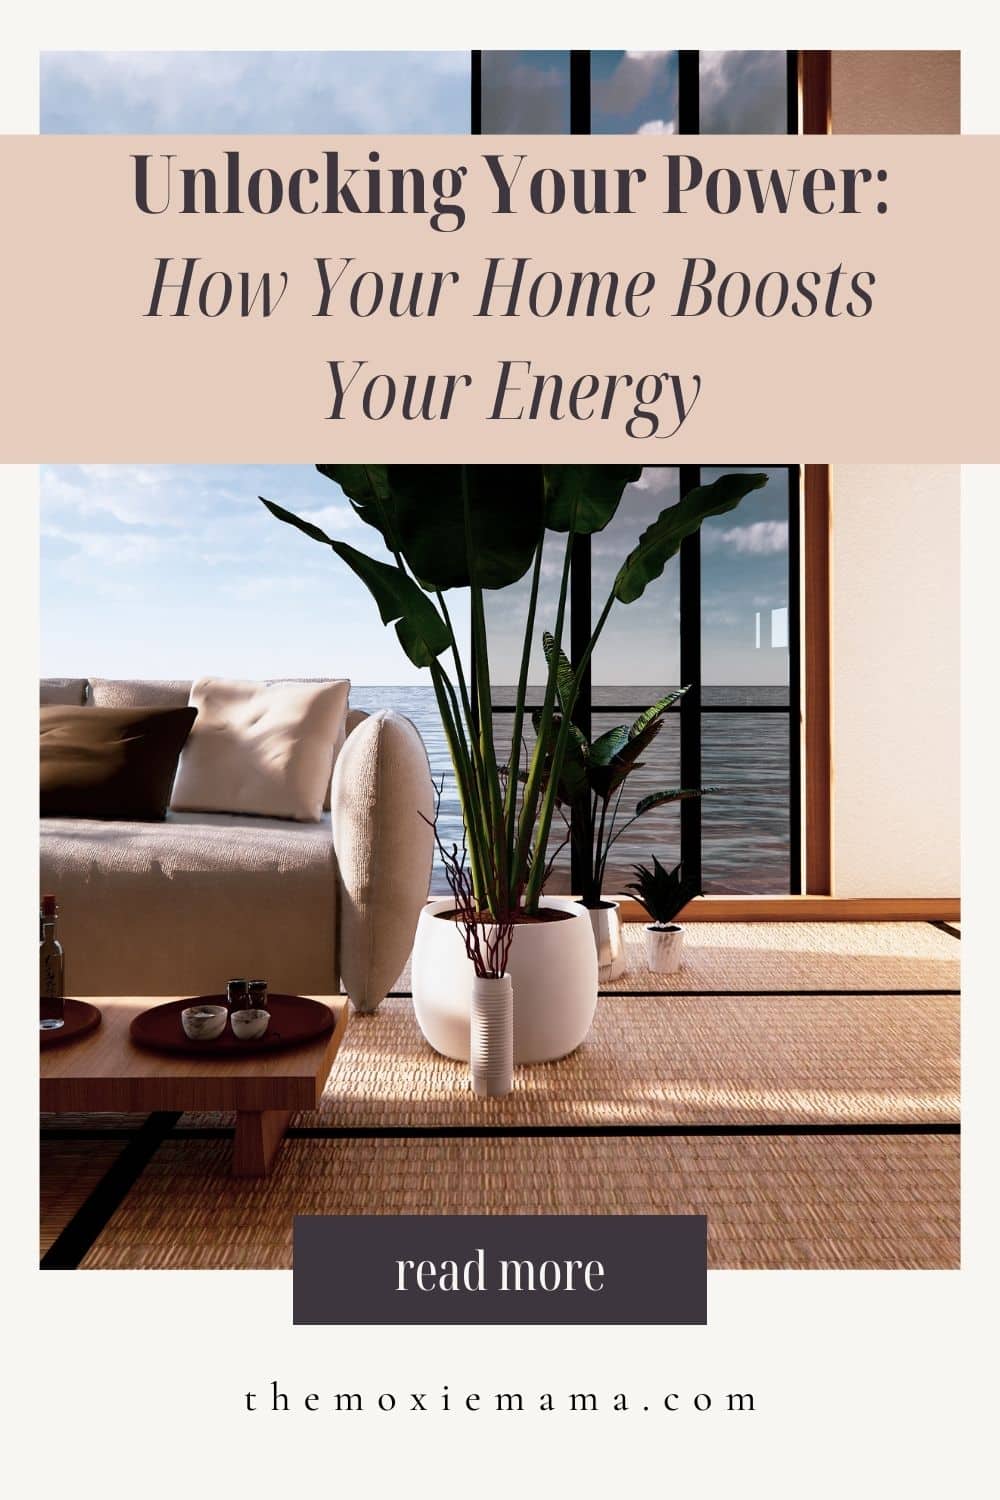 Dive into the world of energy and see how your home can be your special place, making a big difference in how you think and feel.